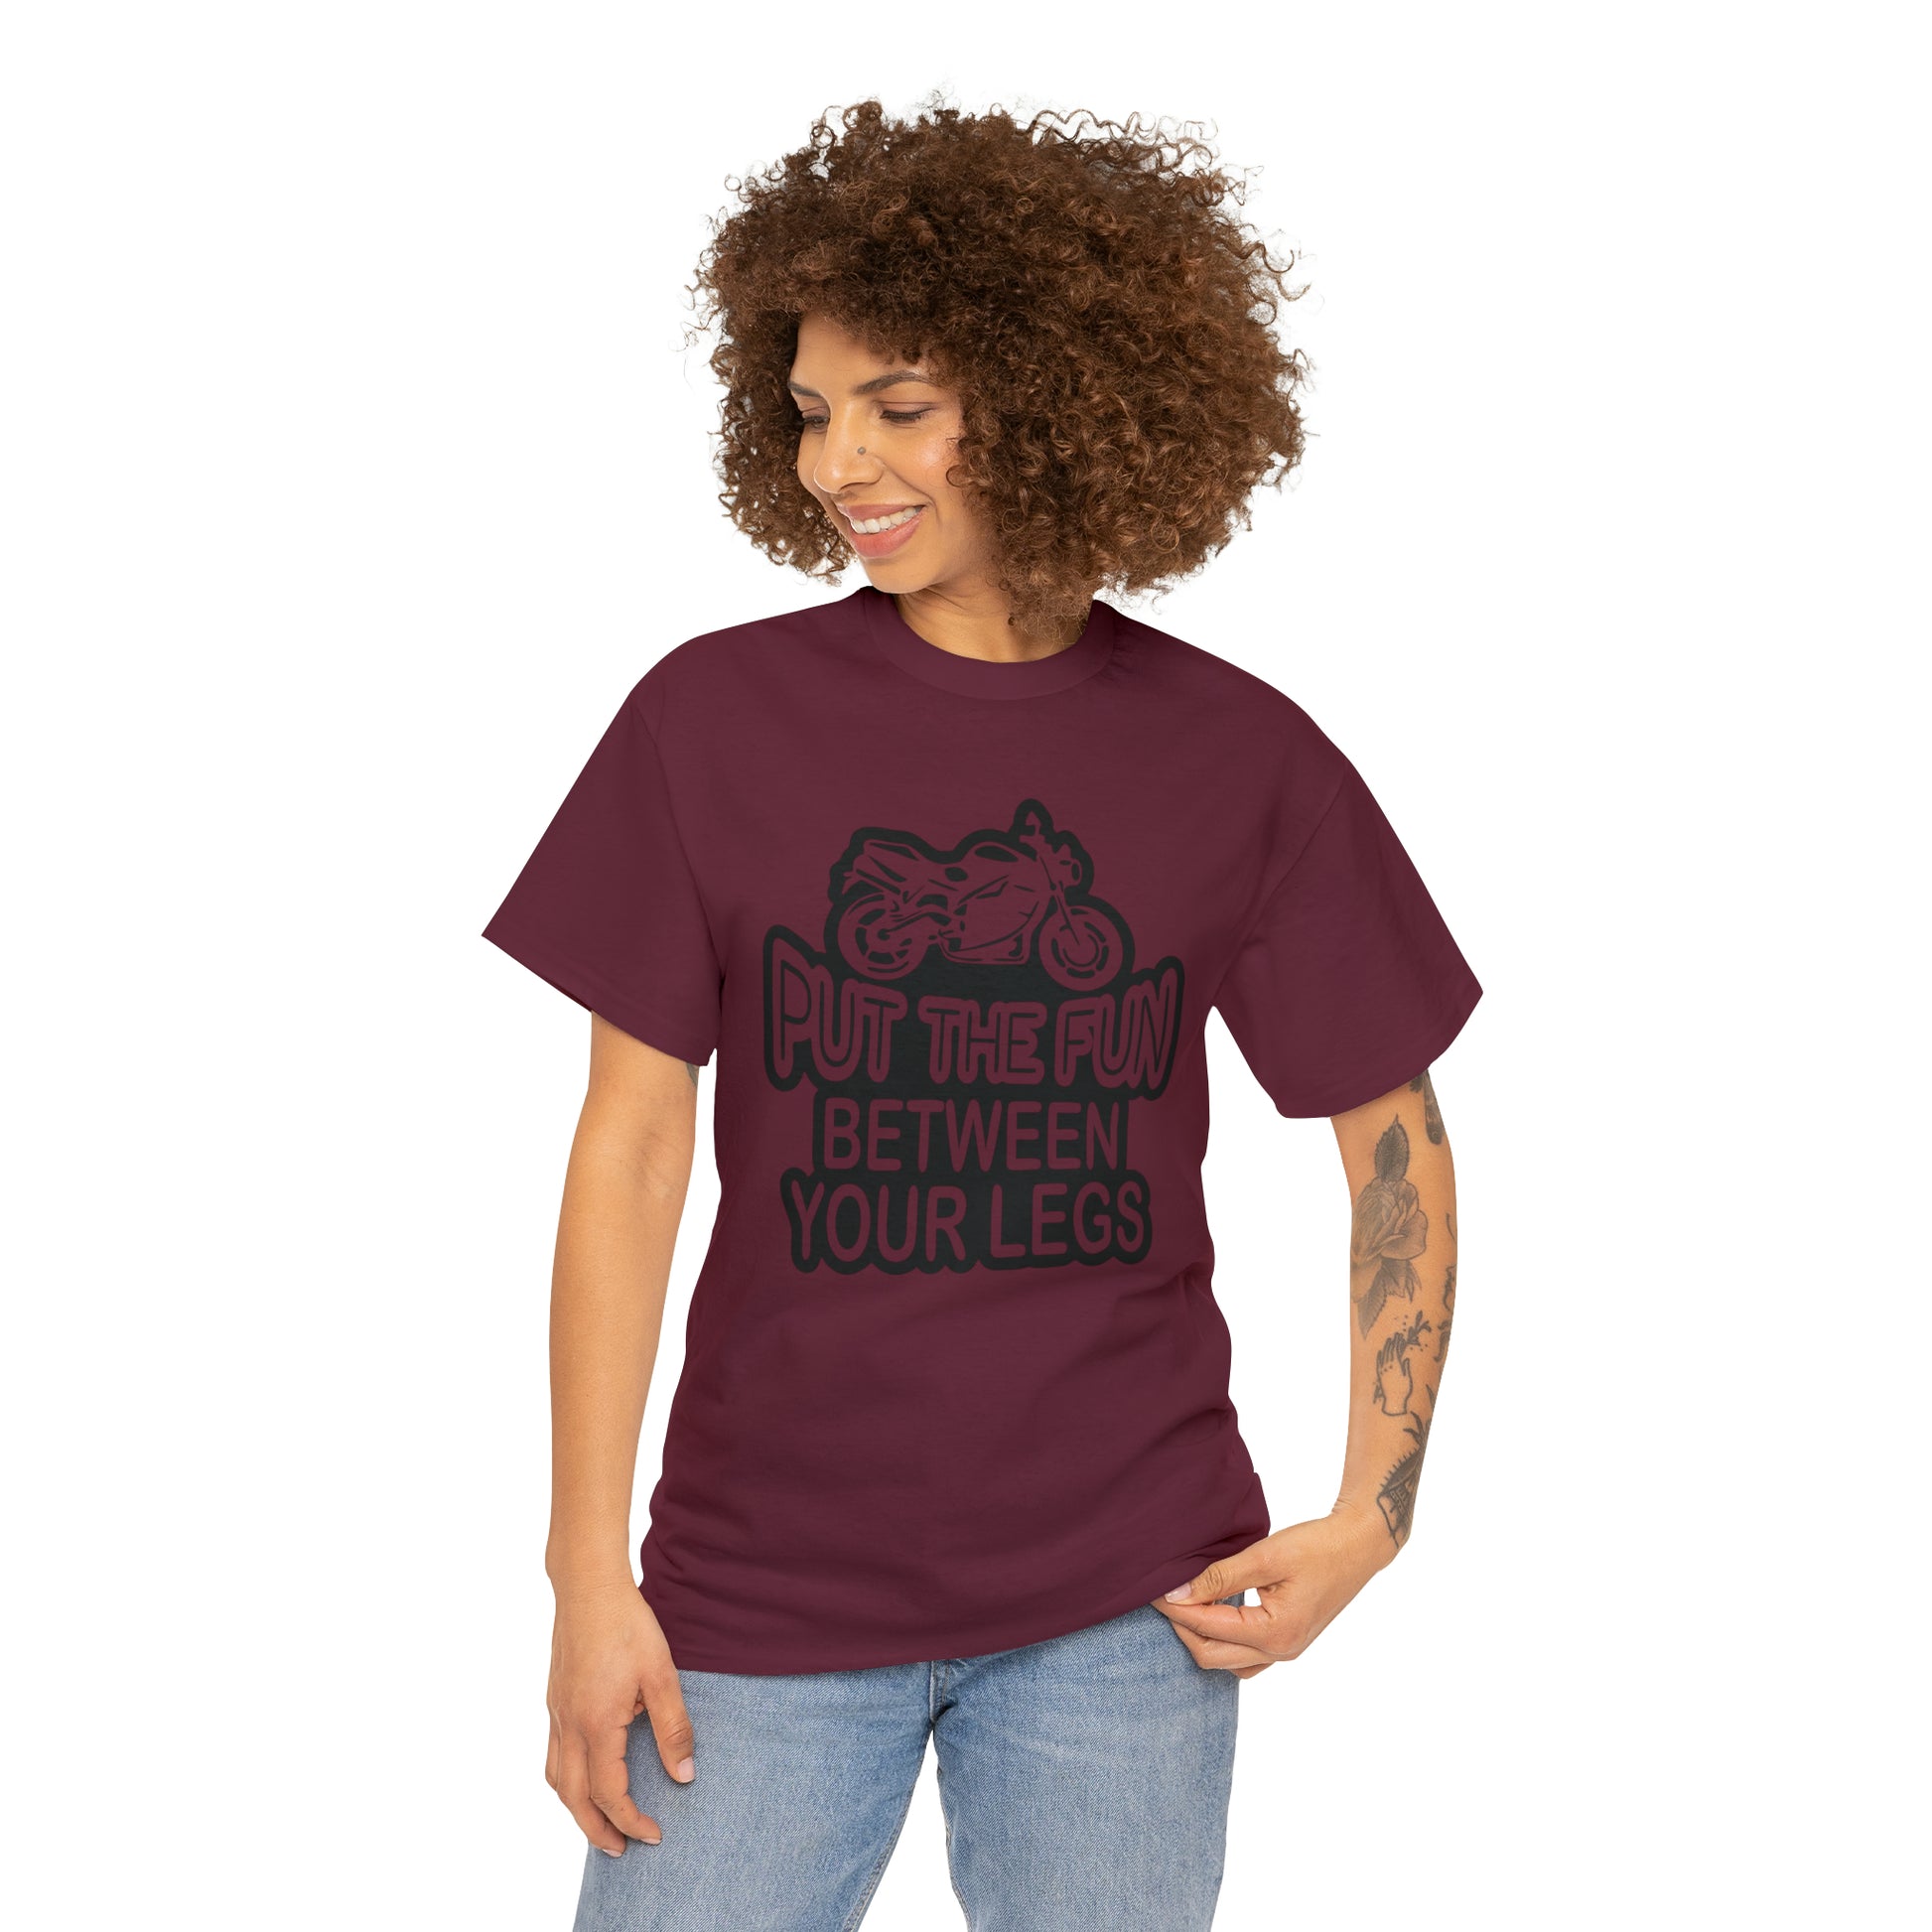 "Motorcycle, Put The Fun Between Your Legs" T-Shirt - Weave Got Gifts - Unique Gifts You Won’t Find Anywhere Else!